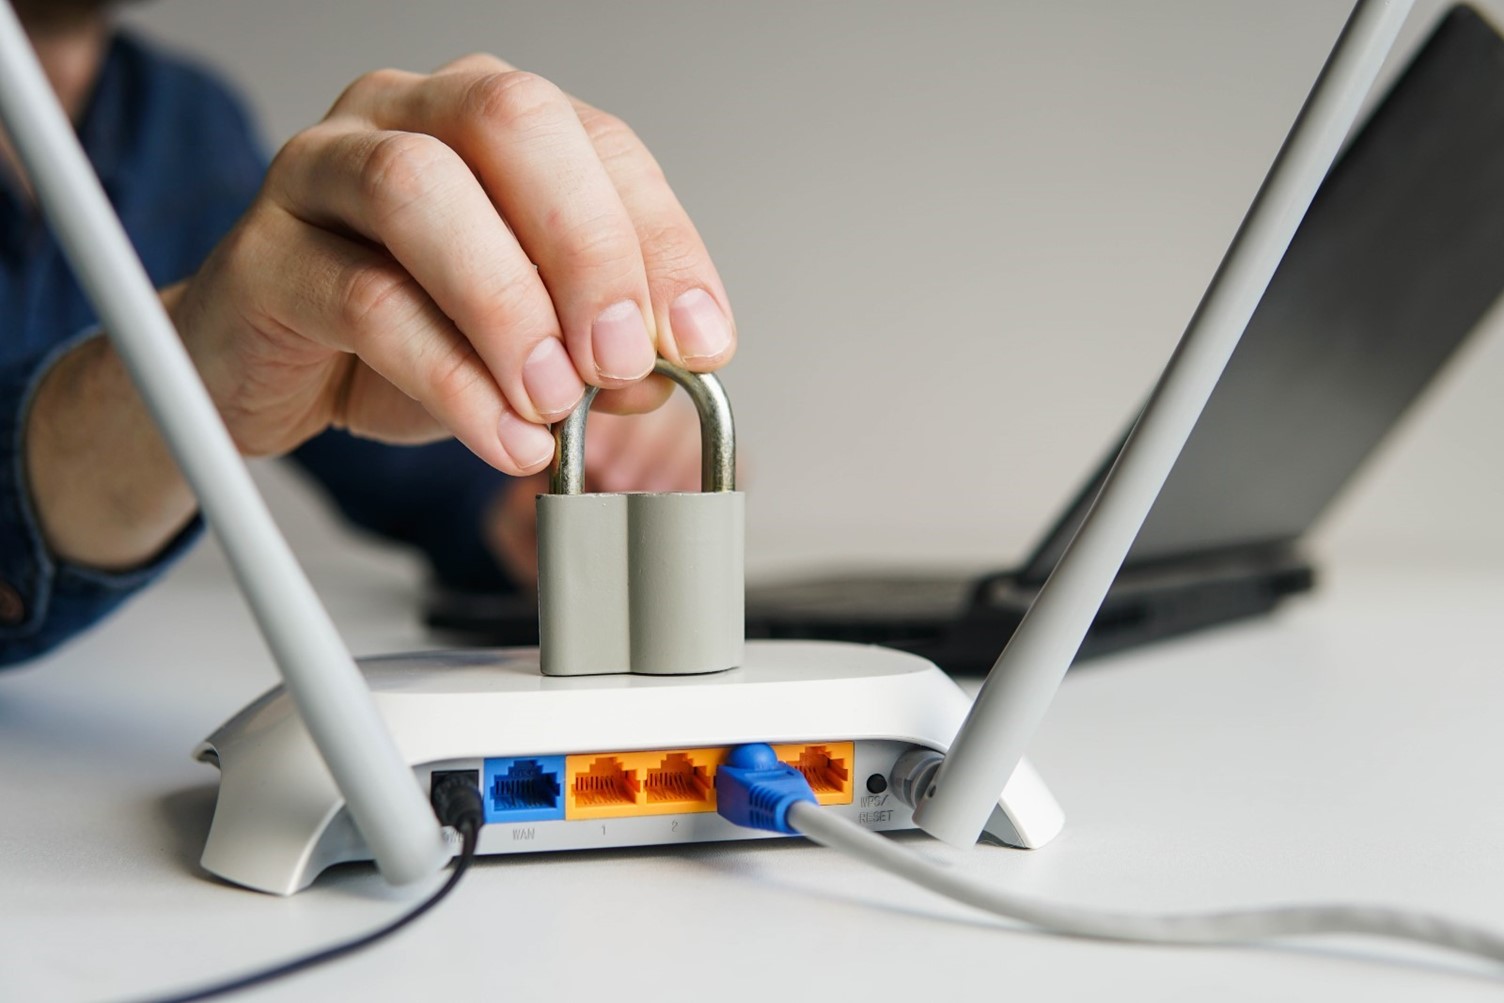 How to Ensure a WiFi Hotspot is Safe for Your Business